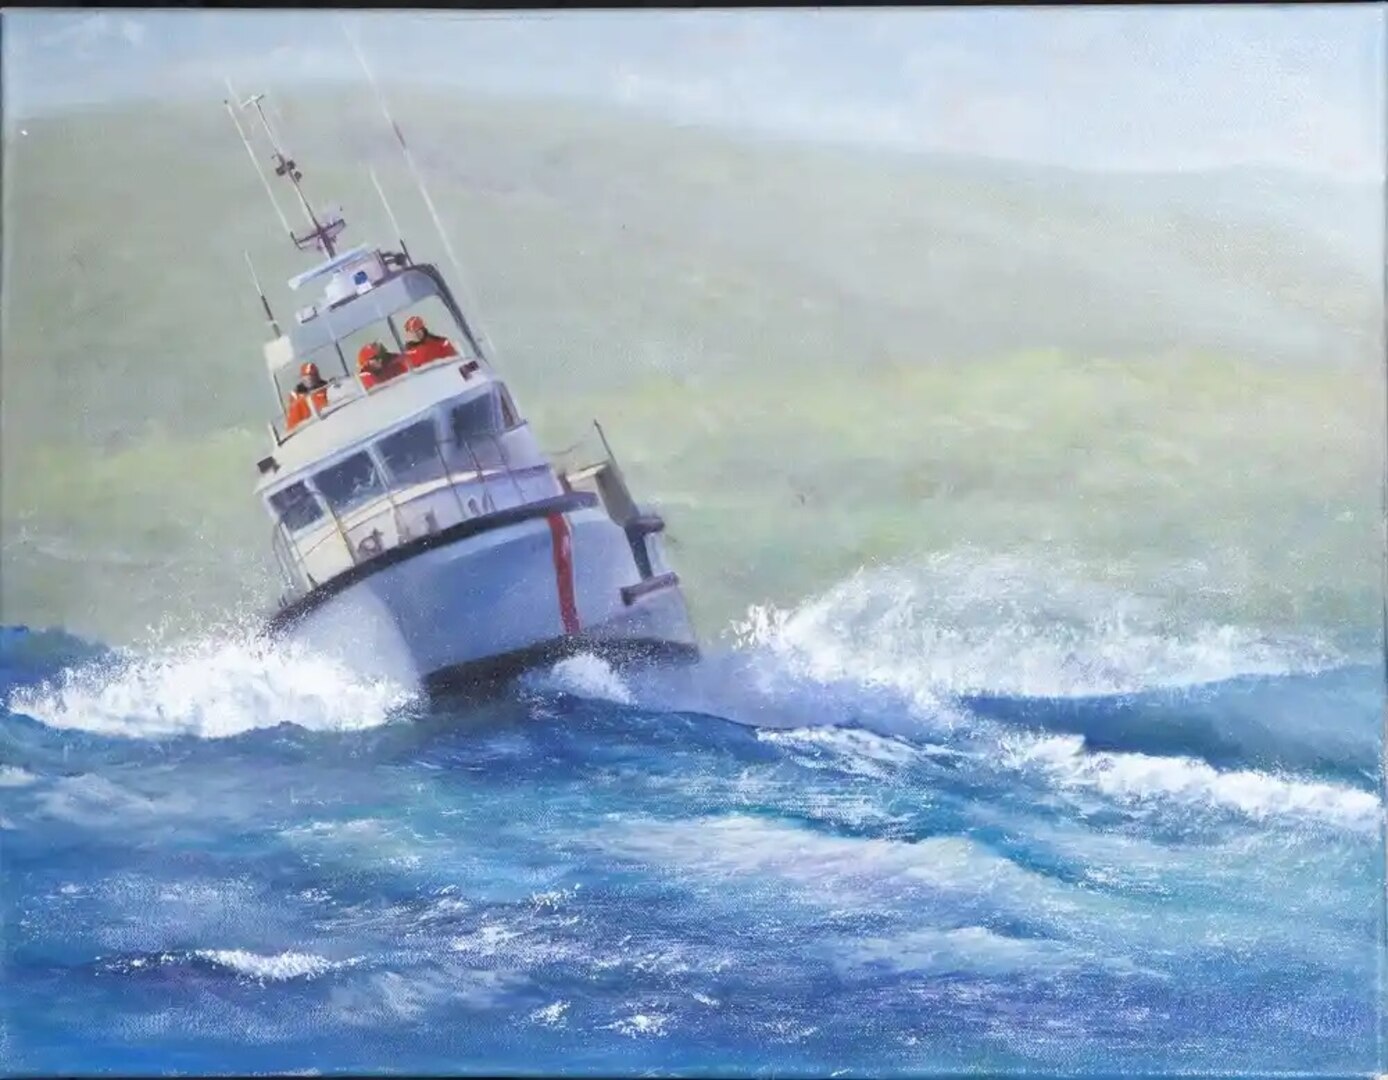 In this work from the U.S. Coast Guard Art Program 2014 Collection, "'Rollin', Rollin‚Rollin''" ID# 201401, crewmembers and their 47-foot Motor Life Boat roll in the surf during training exercises in waters near the Coast Guard station in Morro Bay, Calif. The station provides services for the Central California coast and port security coverage for a nuclear power plant and Vandenberg Air Force Base. U.S. Coast Guard Art Program work by Dennis D. Bloom.